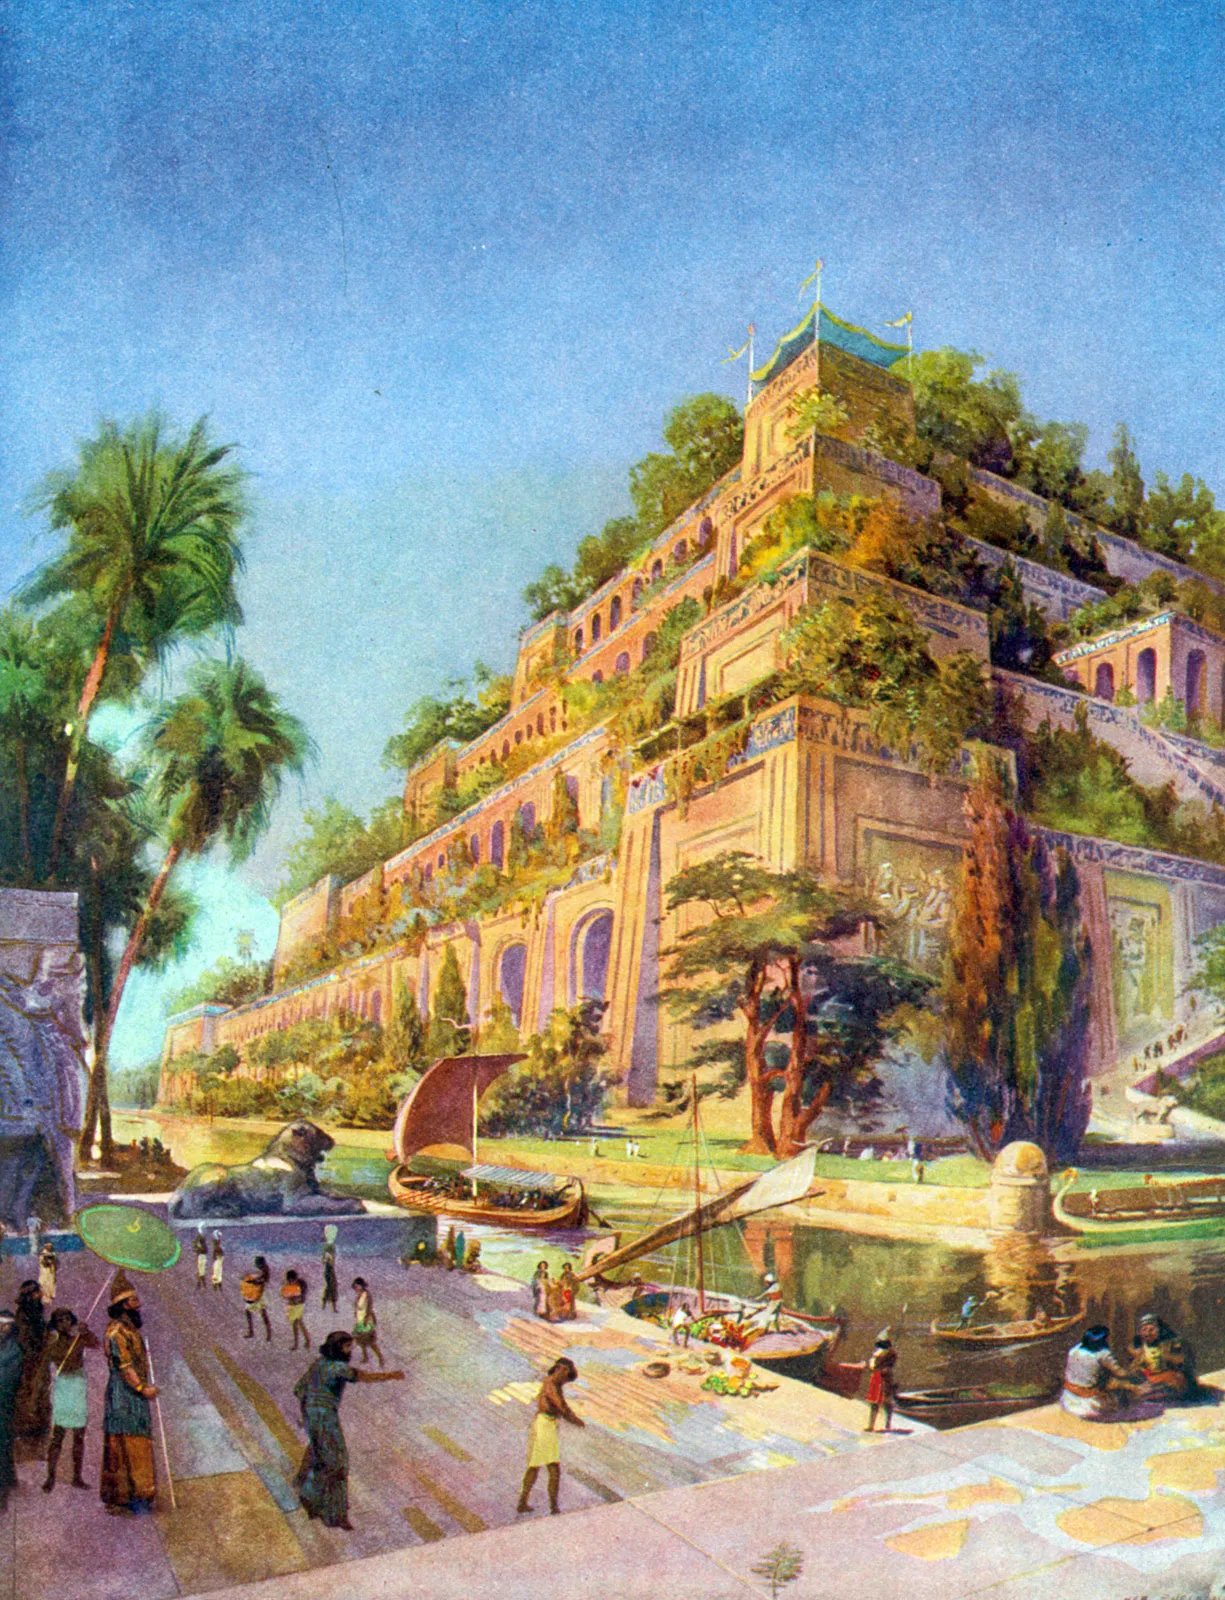 An illustration of an ancient wonder of the world, the Hanging Gardens of Babylon, which were built by King Nebuchadnezzar II in the 6th century BC for his wife Amytis. The image shows a majestic palace, made of stone and decorated with blue and gold elements and lush greenery. The palace has many arches, and is surrounded by lush gardens with different types of trees trees. The gardens are irrigated by a river that flows in front of the palace, where boats and people are sailing and enjoying the scenery. The sky is blue and the overall mood of the image is peaceful and idyllic.